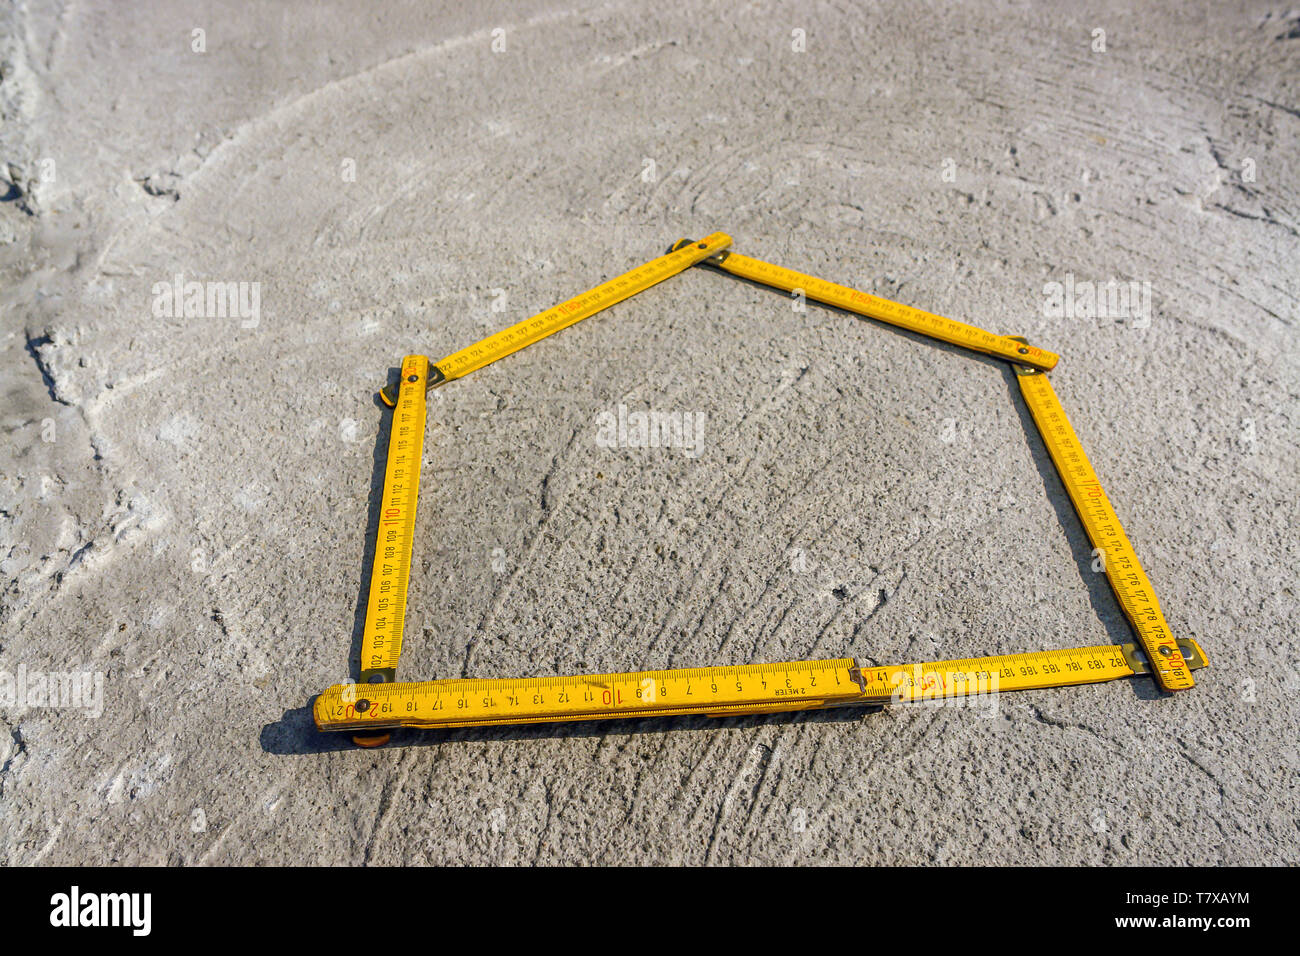 House-shaped yellow wooden folding ruler placed on concrete foundation surface Stock Photo